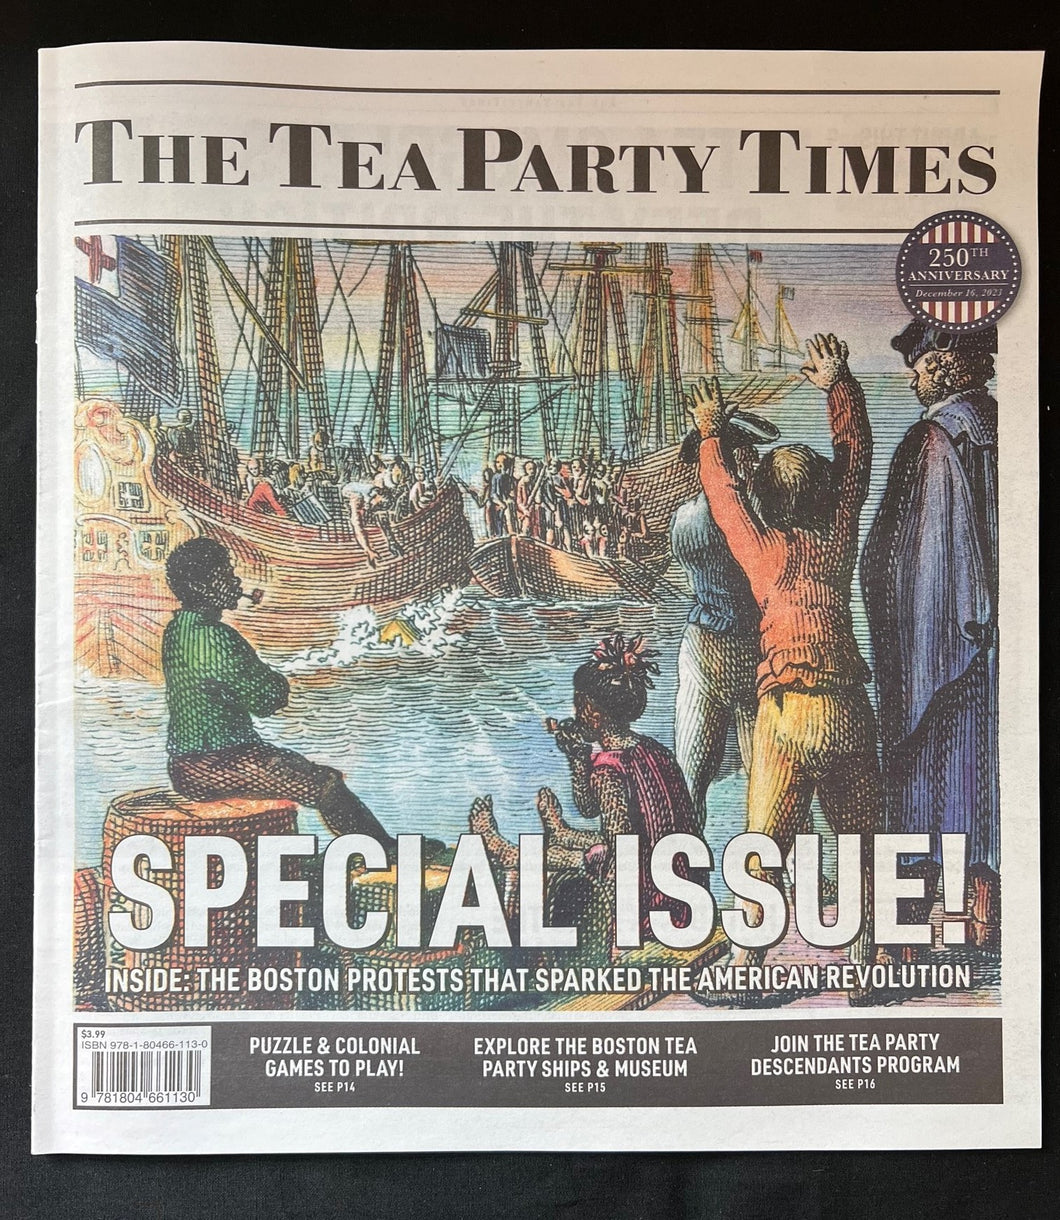 The Tea Party Times